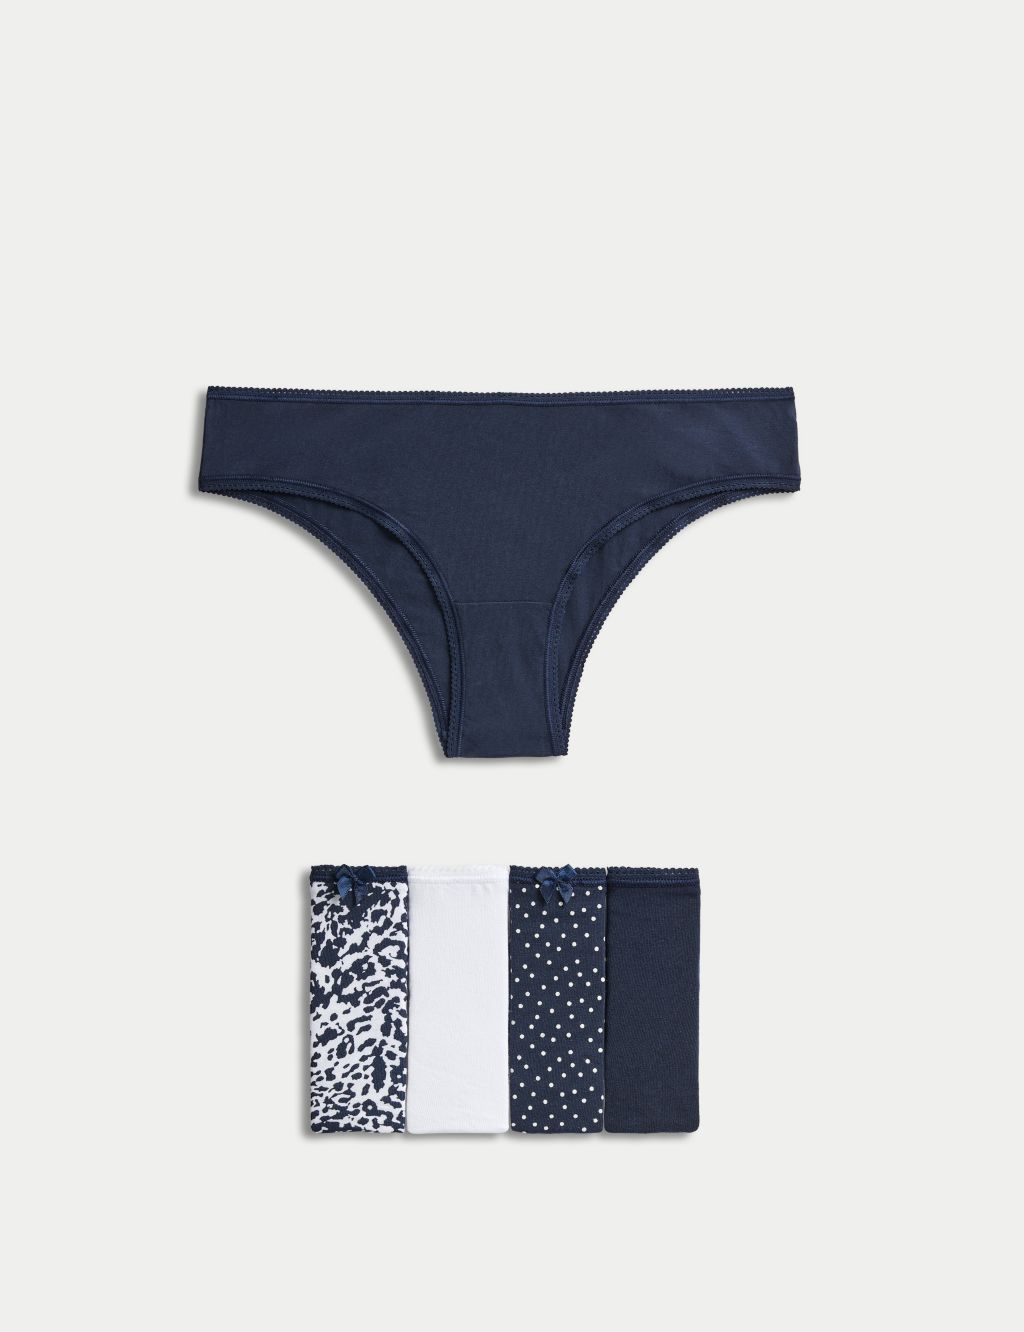 Buy Navy Floral Lace Full Knickers 20, Knickers